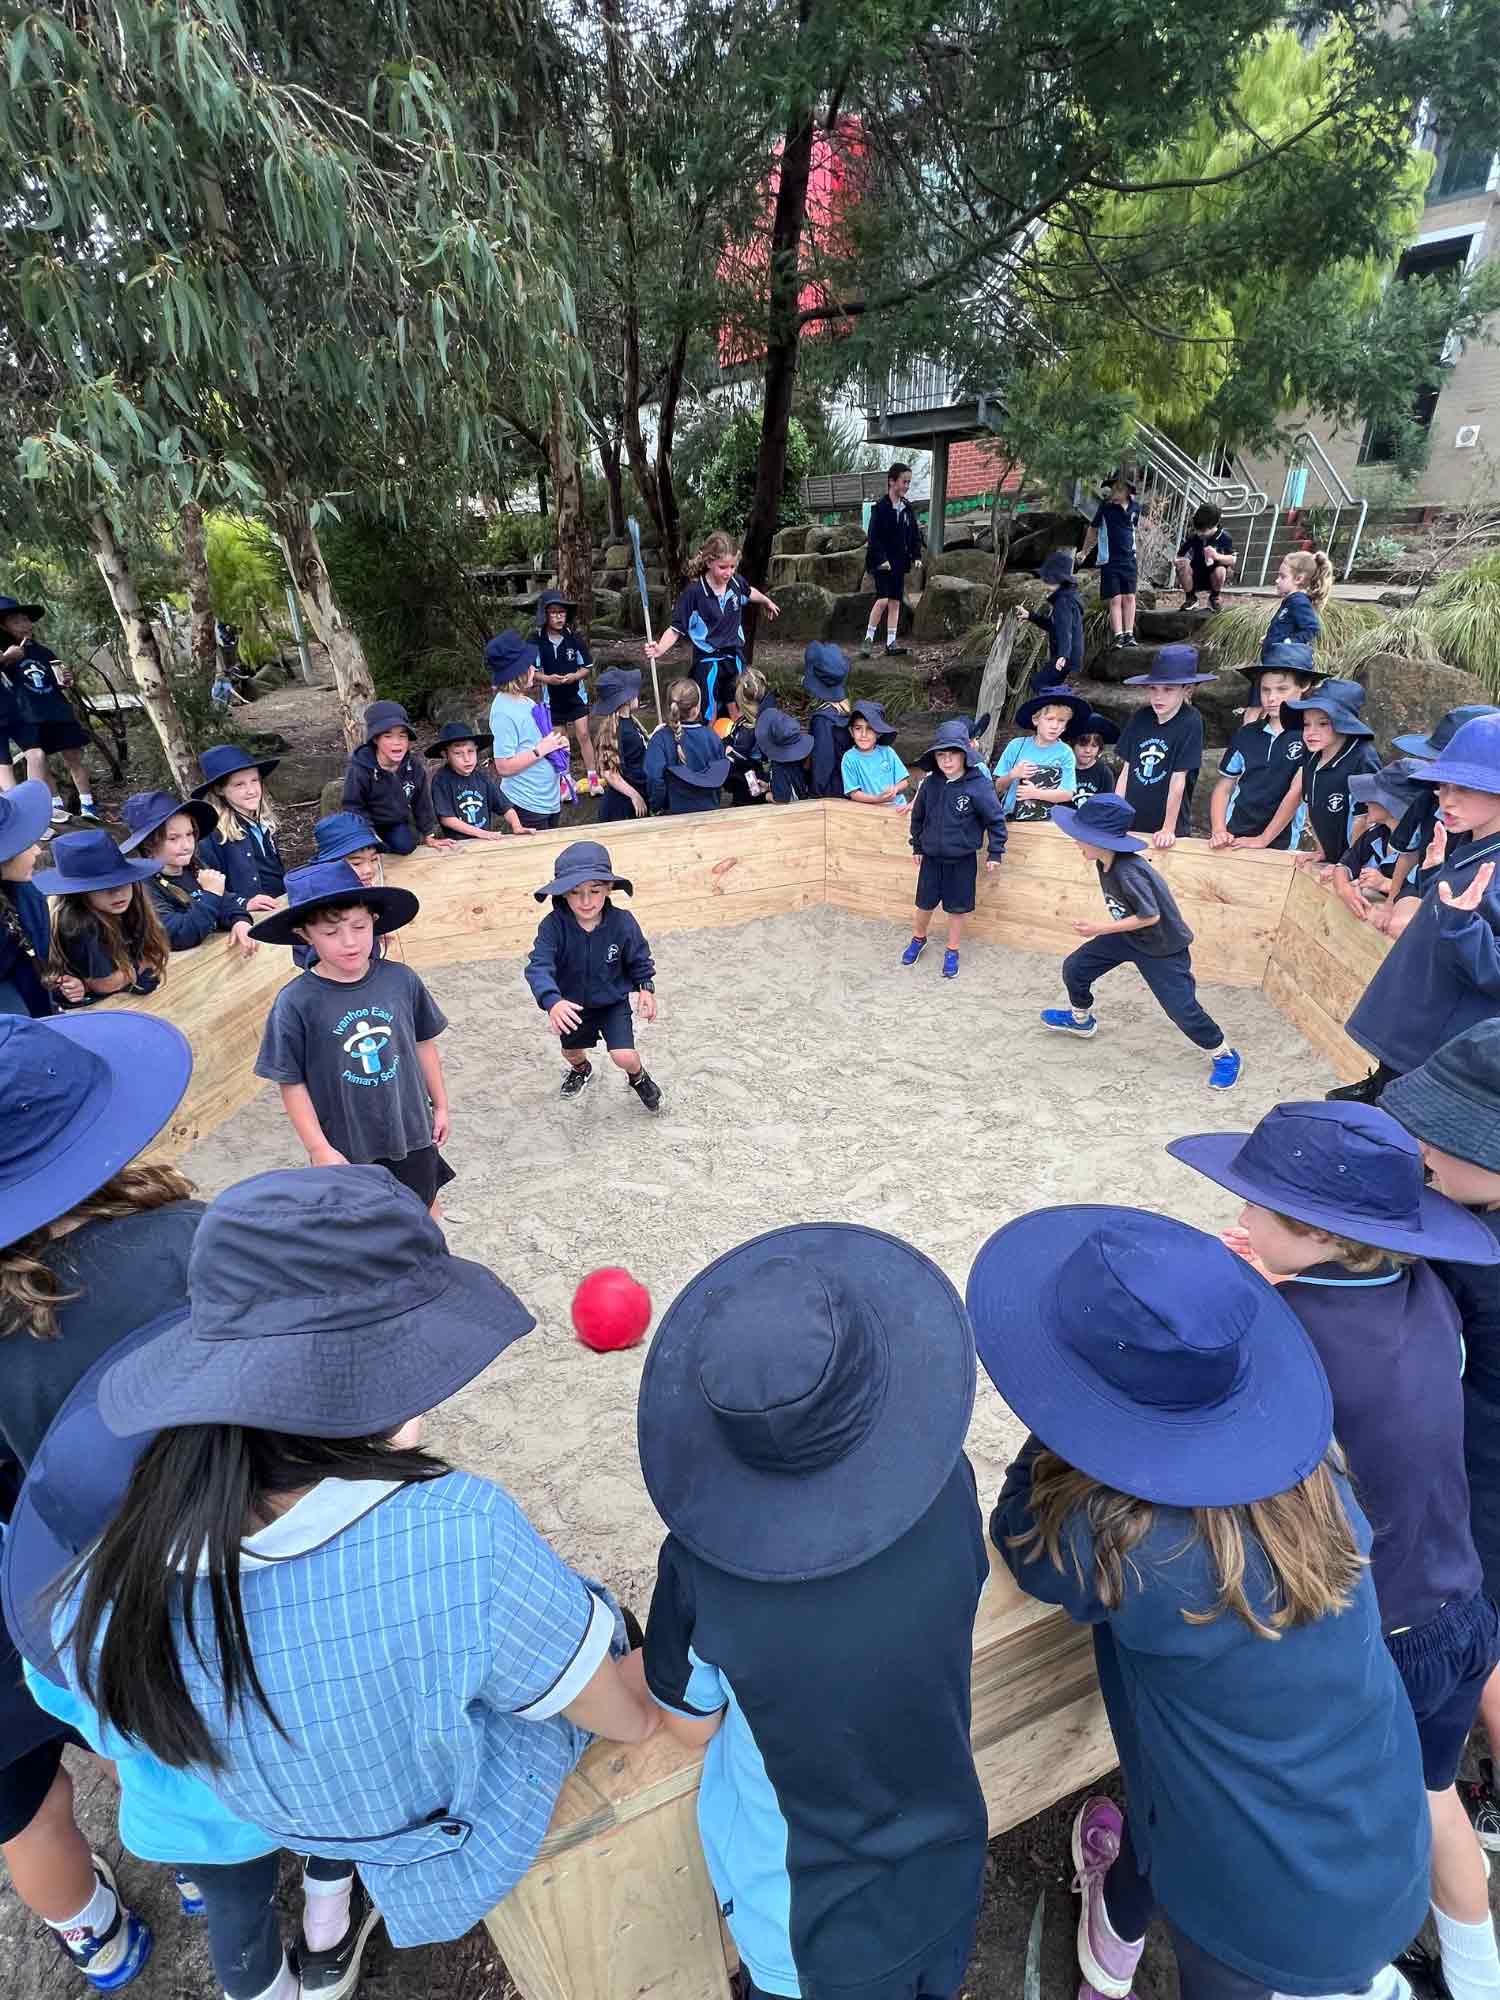 Primary School Students join in playing Gaga Ball in their Gaga Ball Pit. 